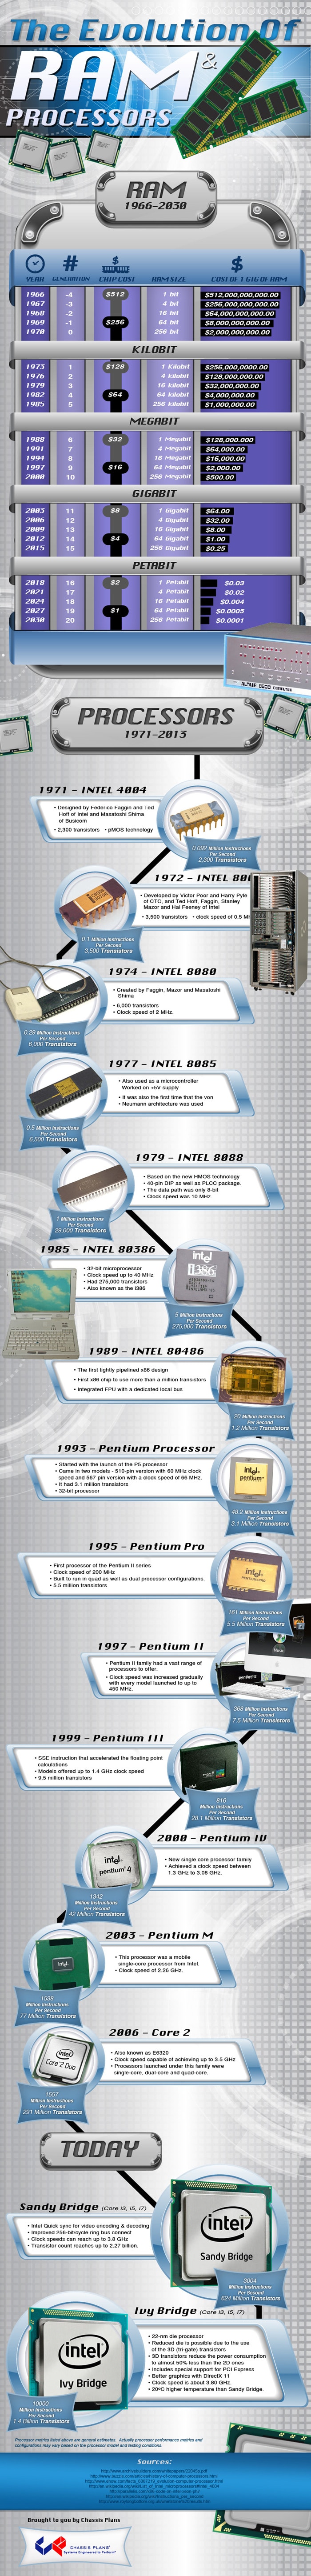 Cost & Tech Evolution Of RAM & Processors [Infographic]